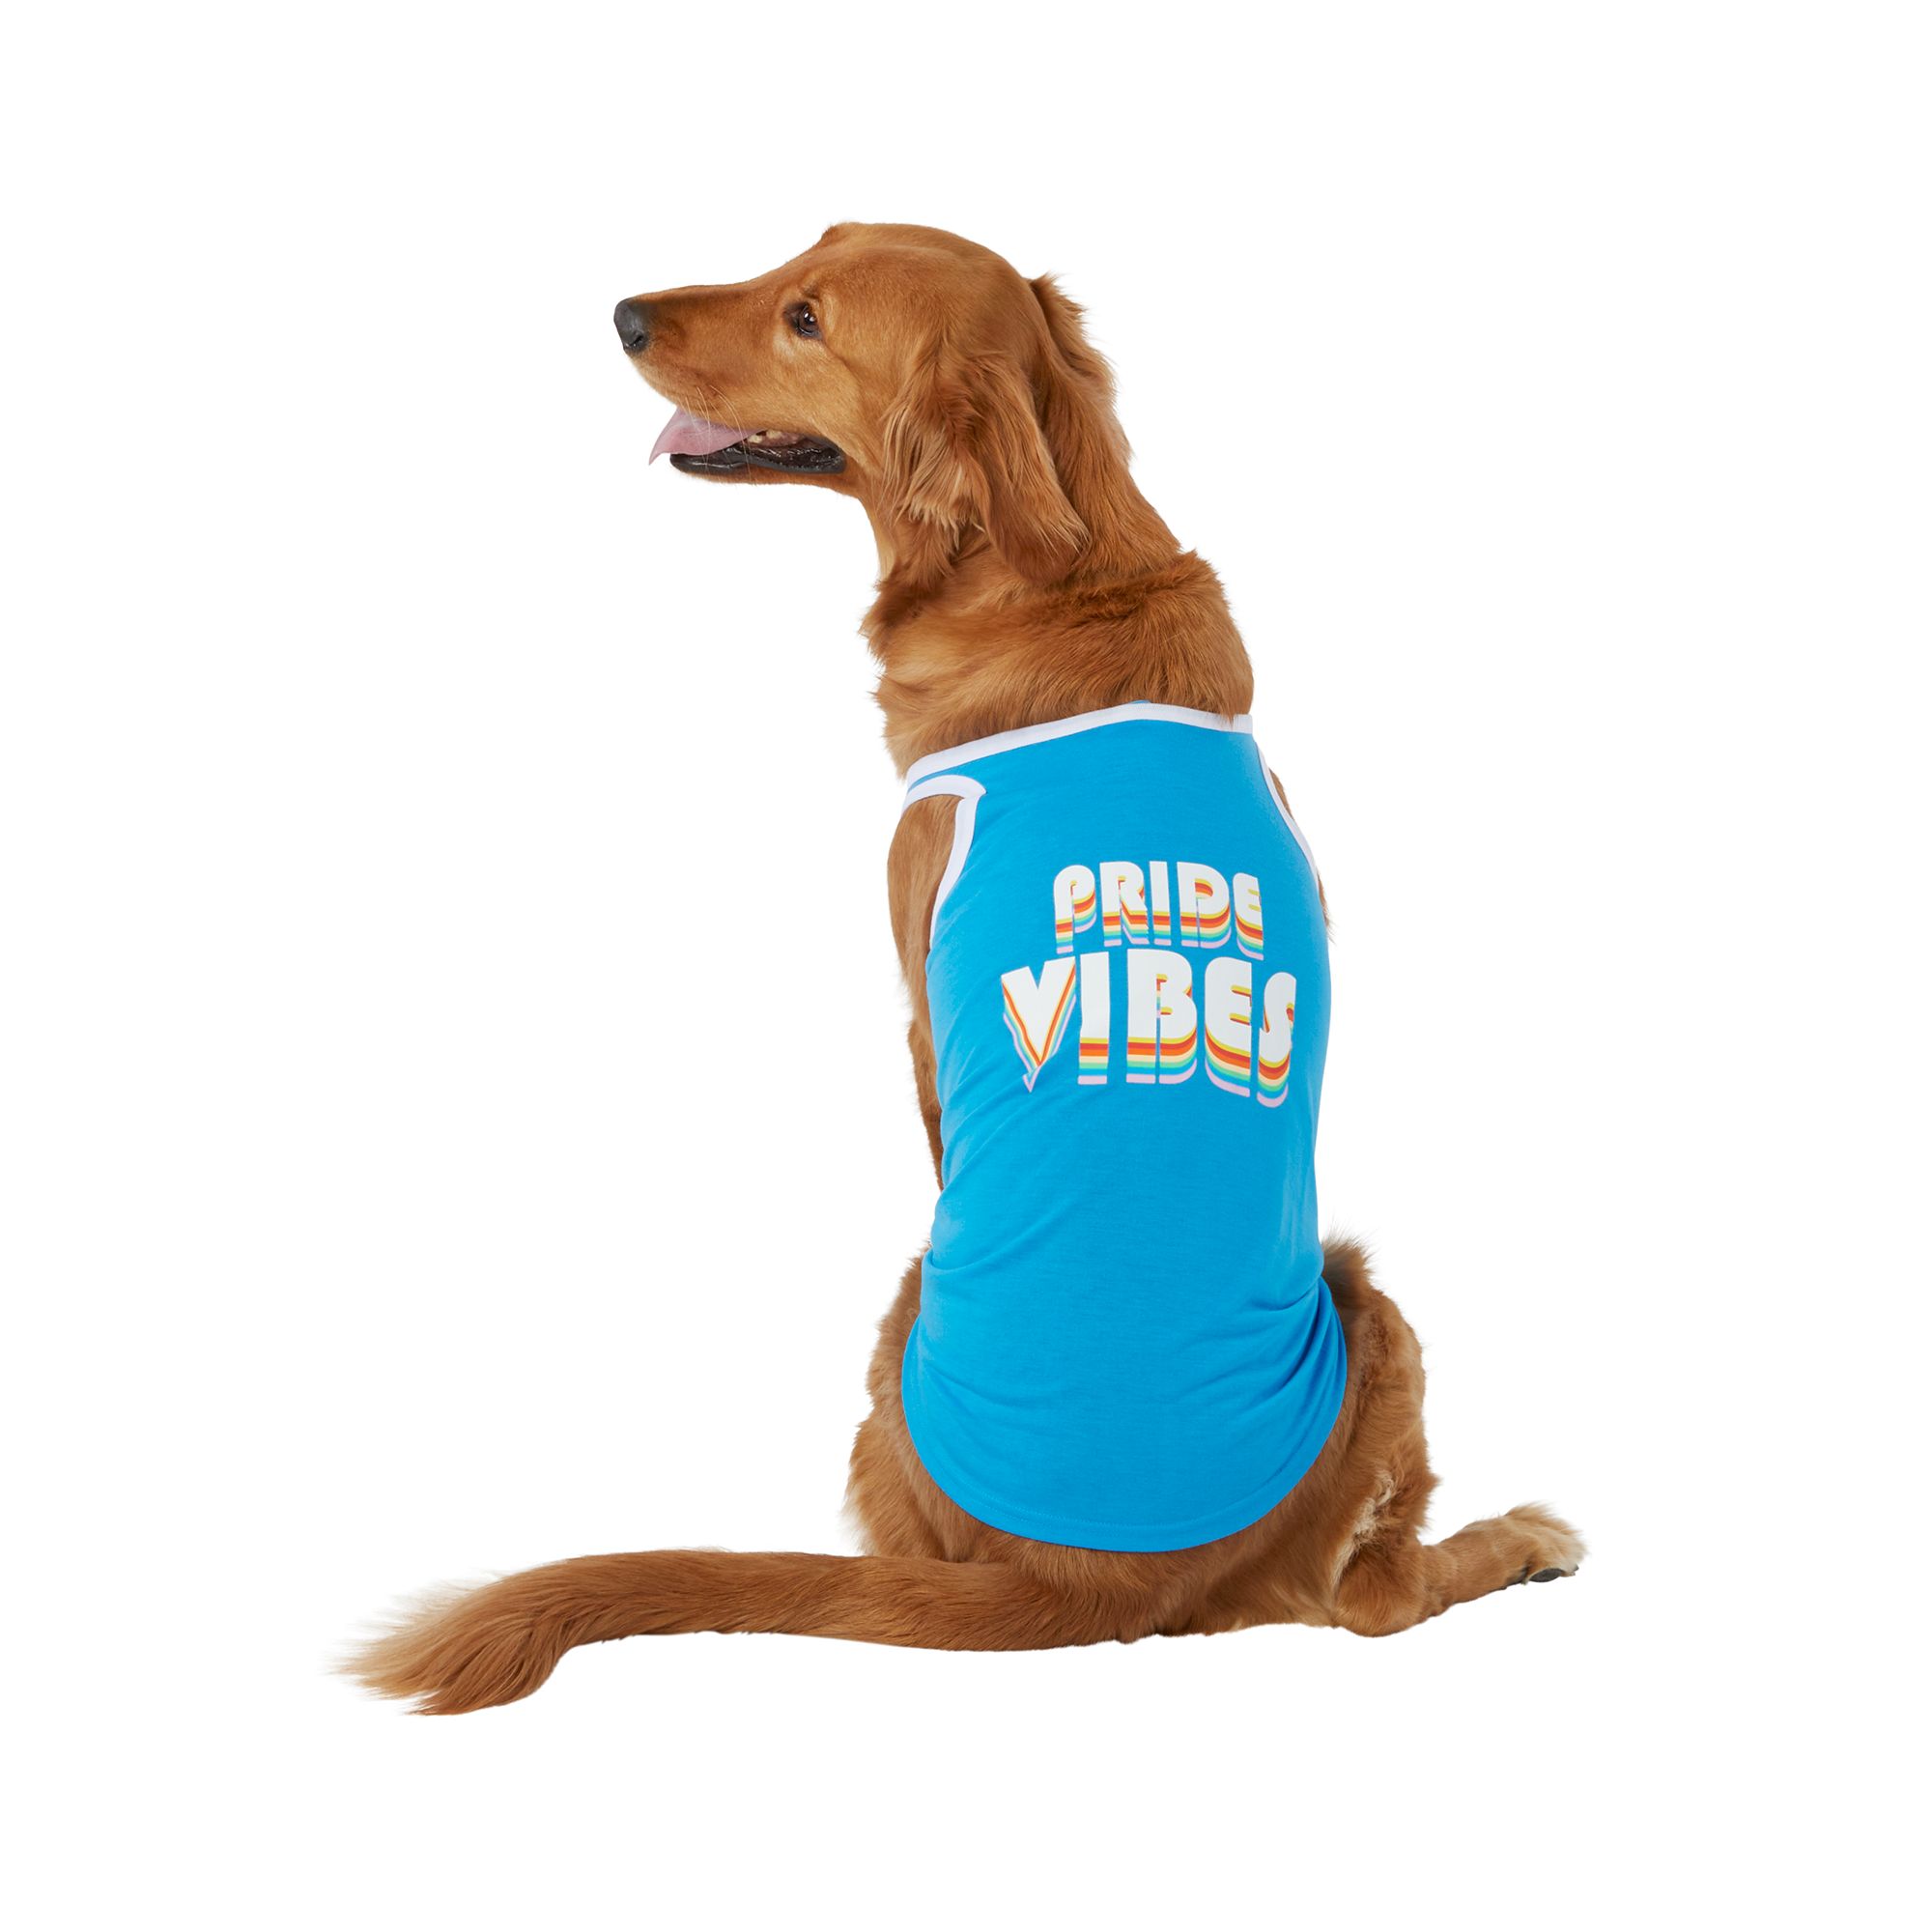 Are Loved® Dog Tank Top | dog T-shirts & Tops | PetSmart